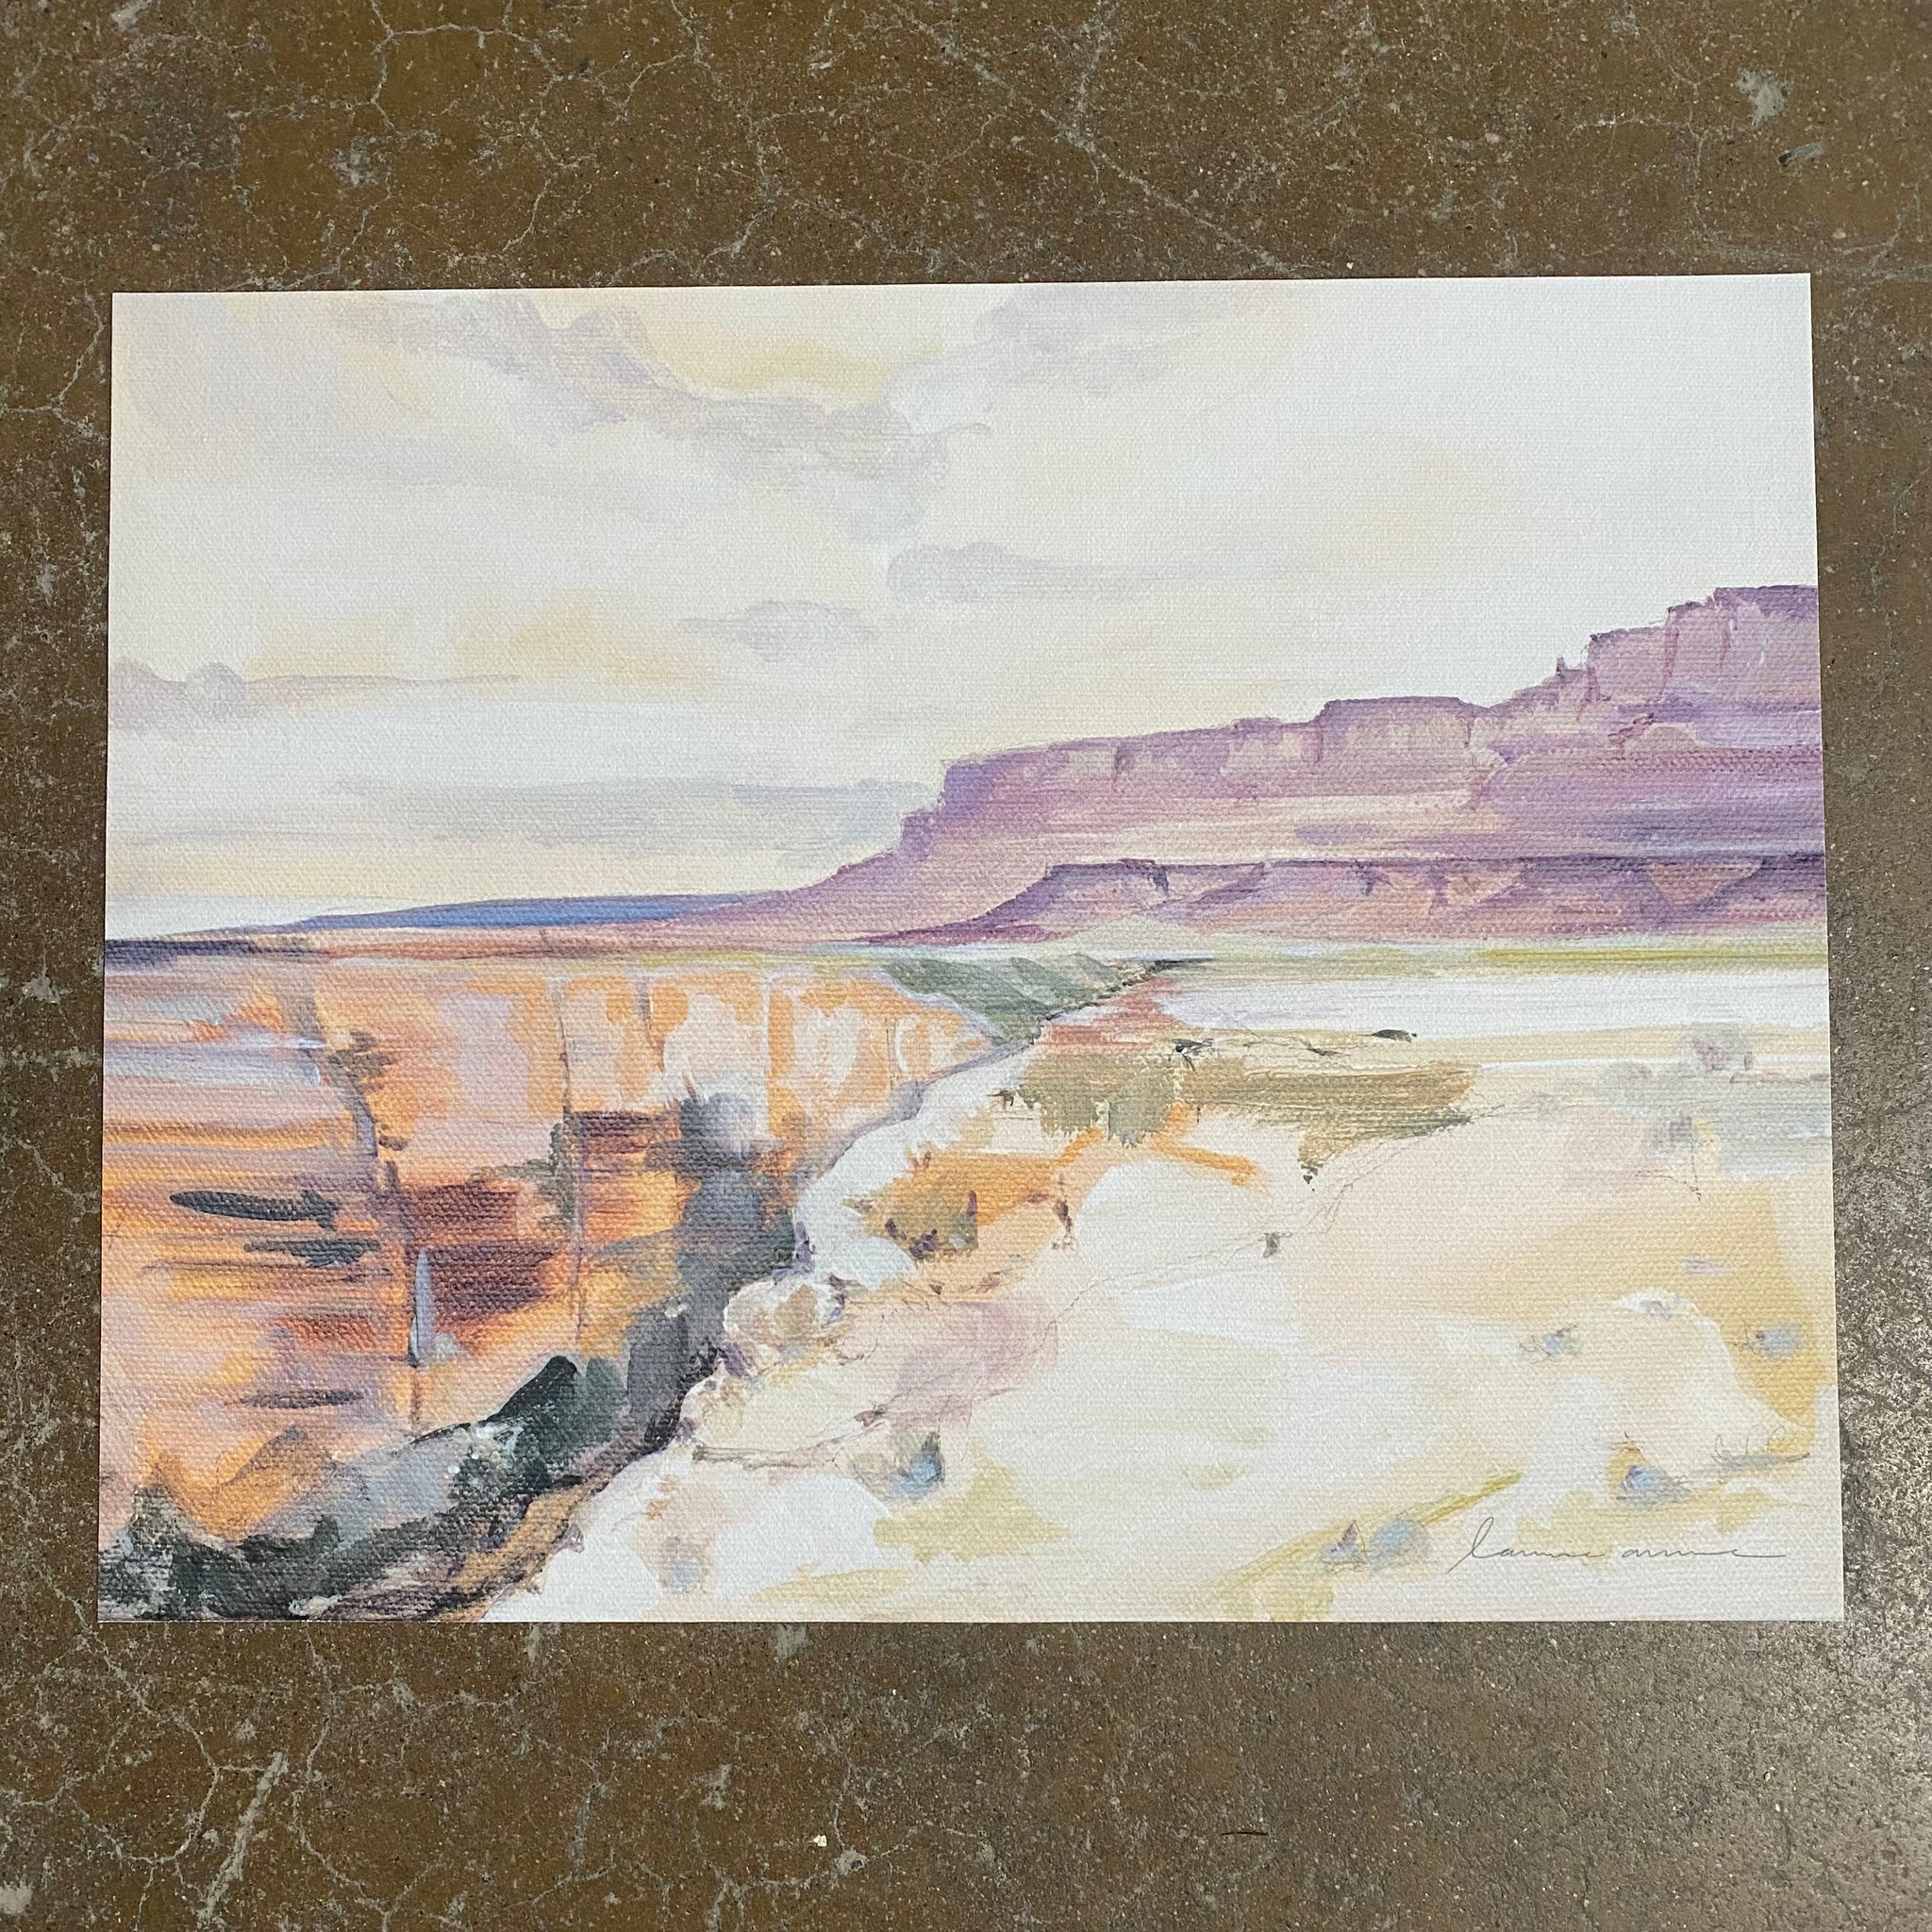 82. Marble Canyon 11x14